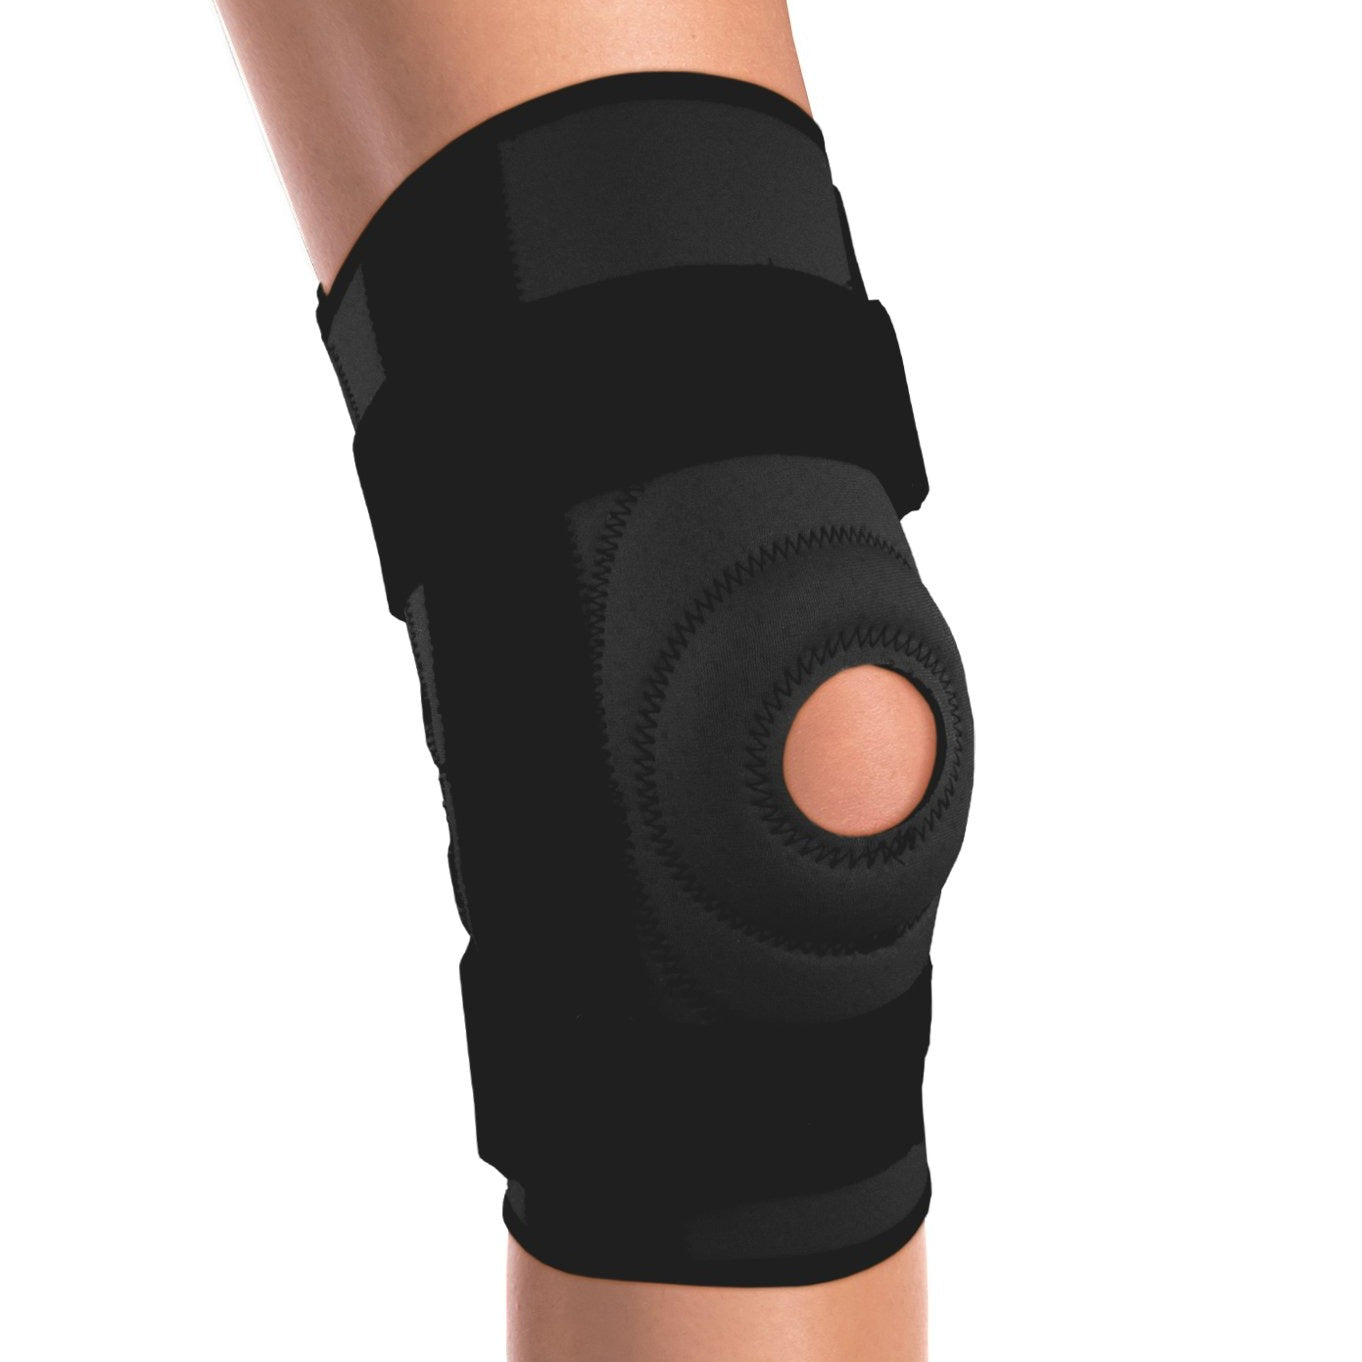 HYBRID WRAP KNEE SUPPORT OSFM, Knee Braces & Sleeves, By Body Part, Open  Catalog